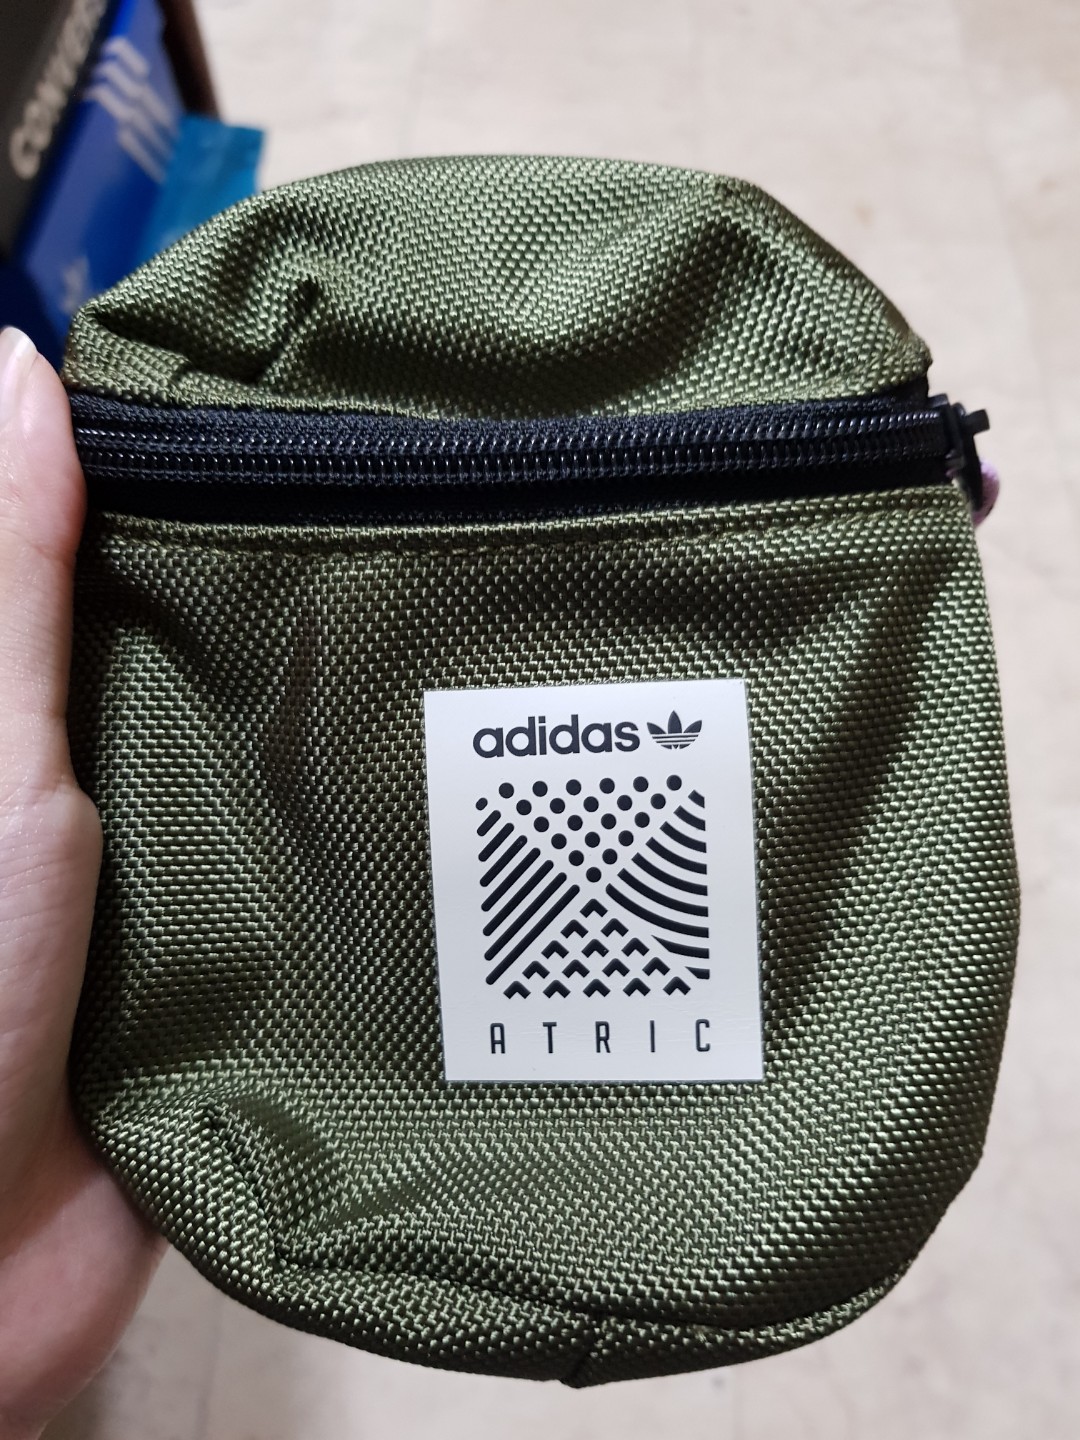 Adidas atric Pouch, Everything Else on 